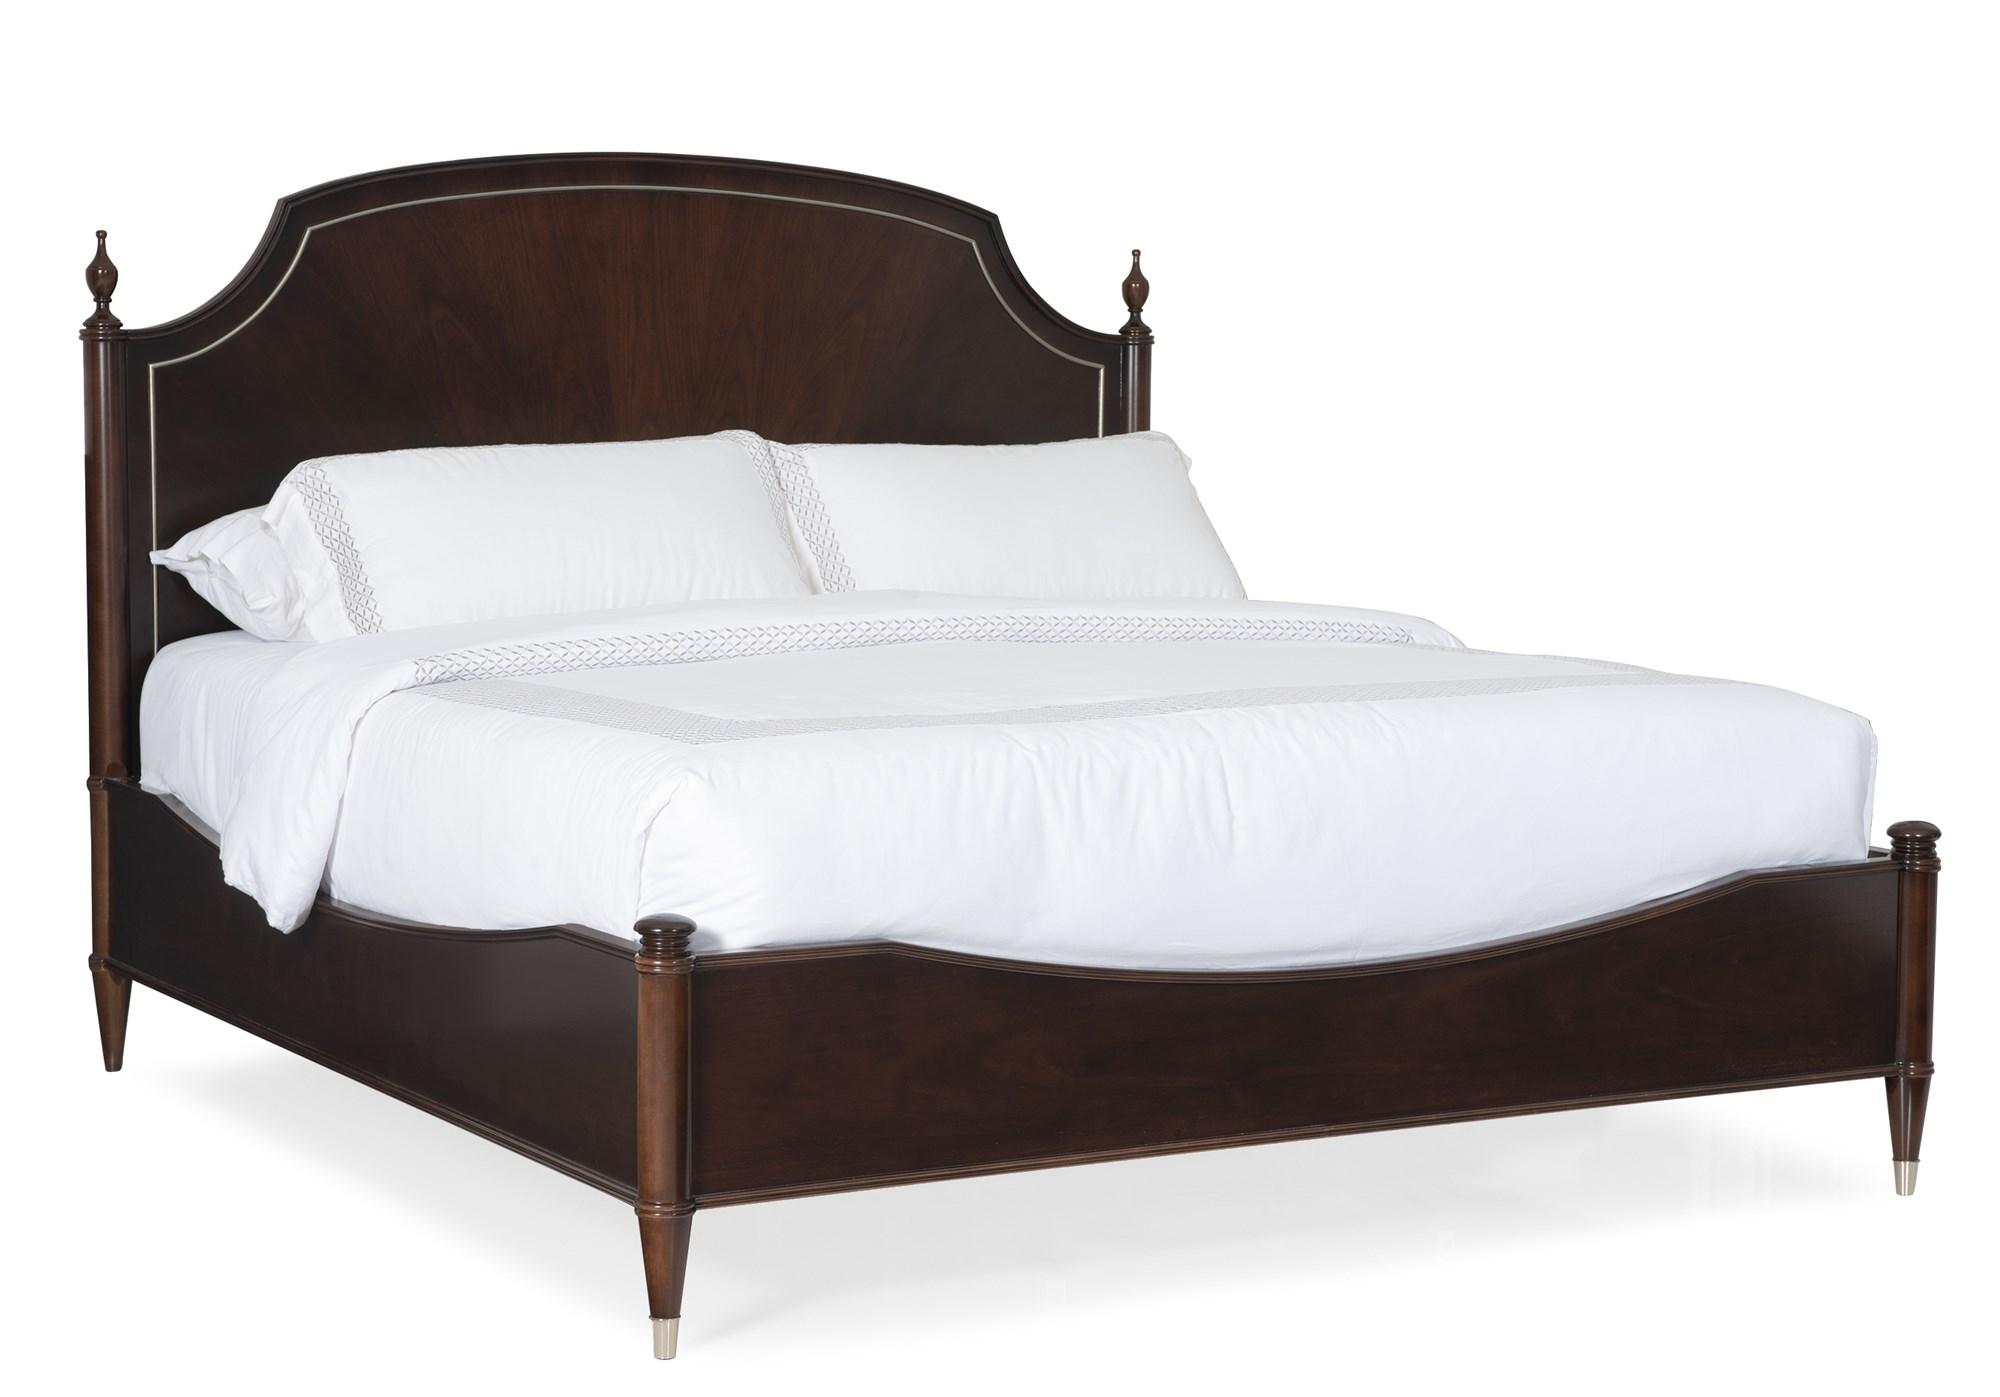 

    
Mocha Walnut & Soft Silver Paint Finish King Bed SUITE DREAMS by Caracole
